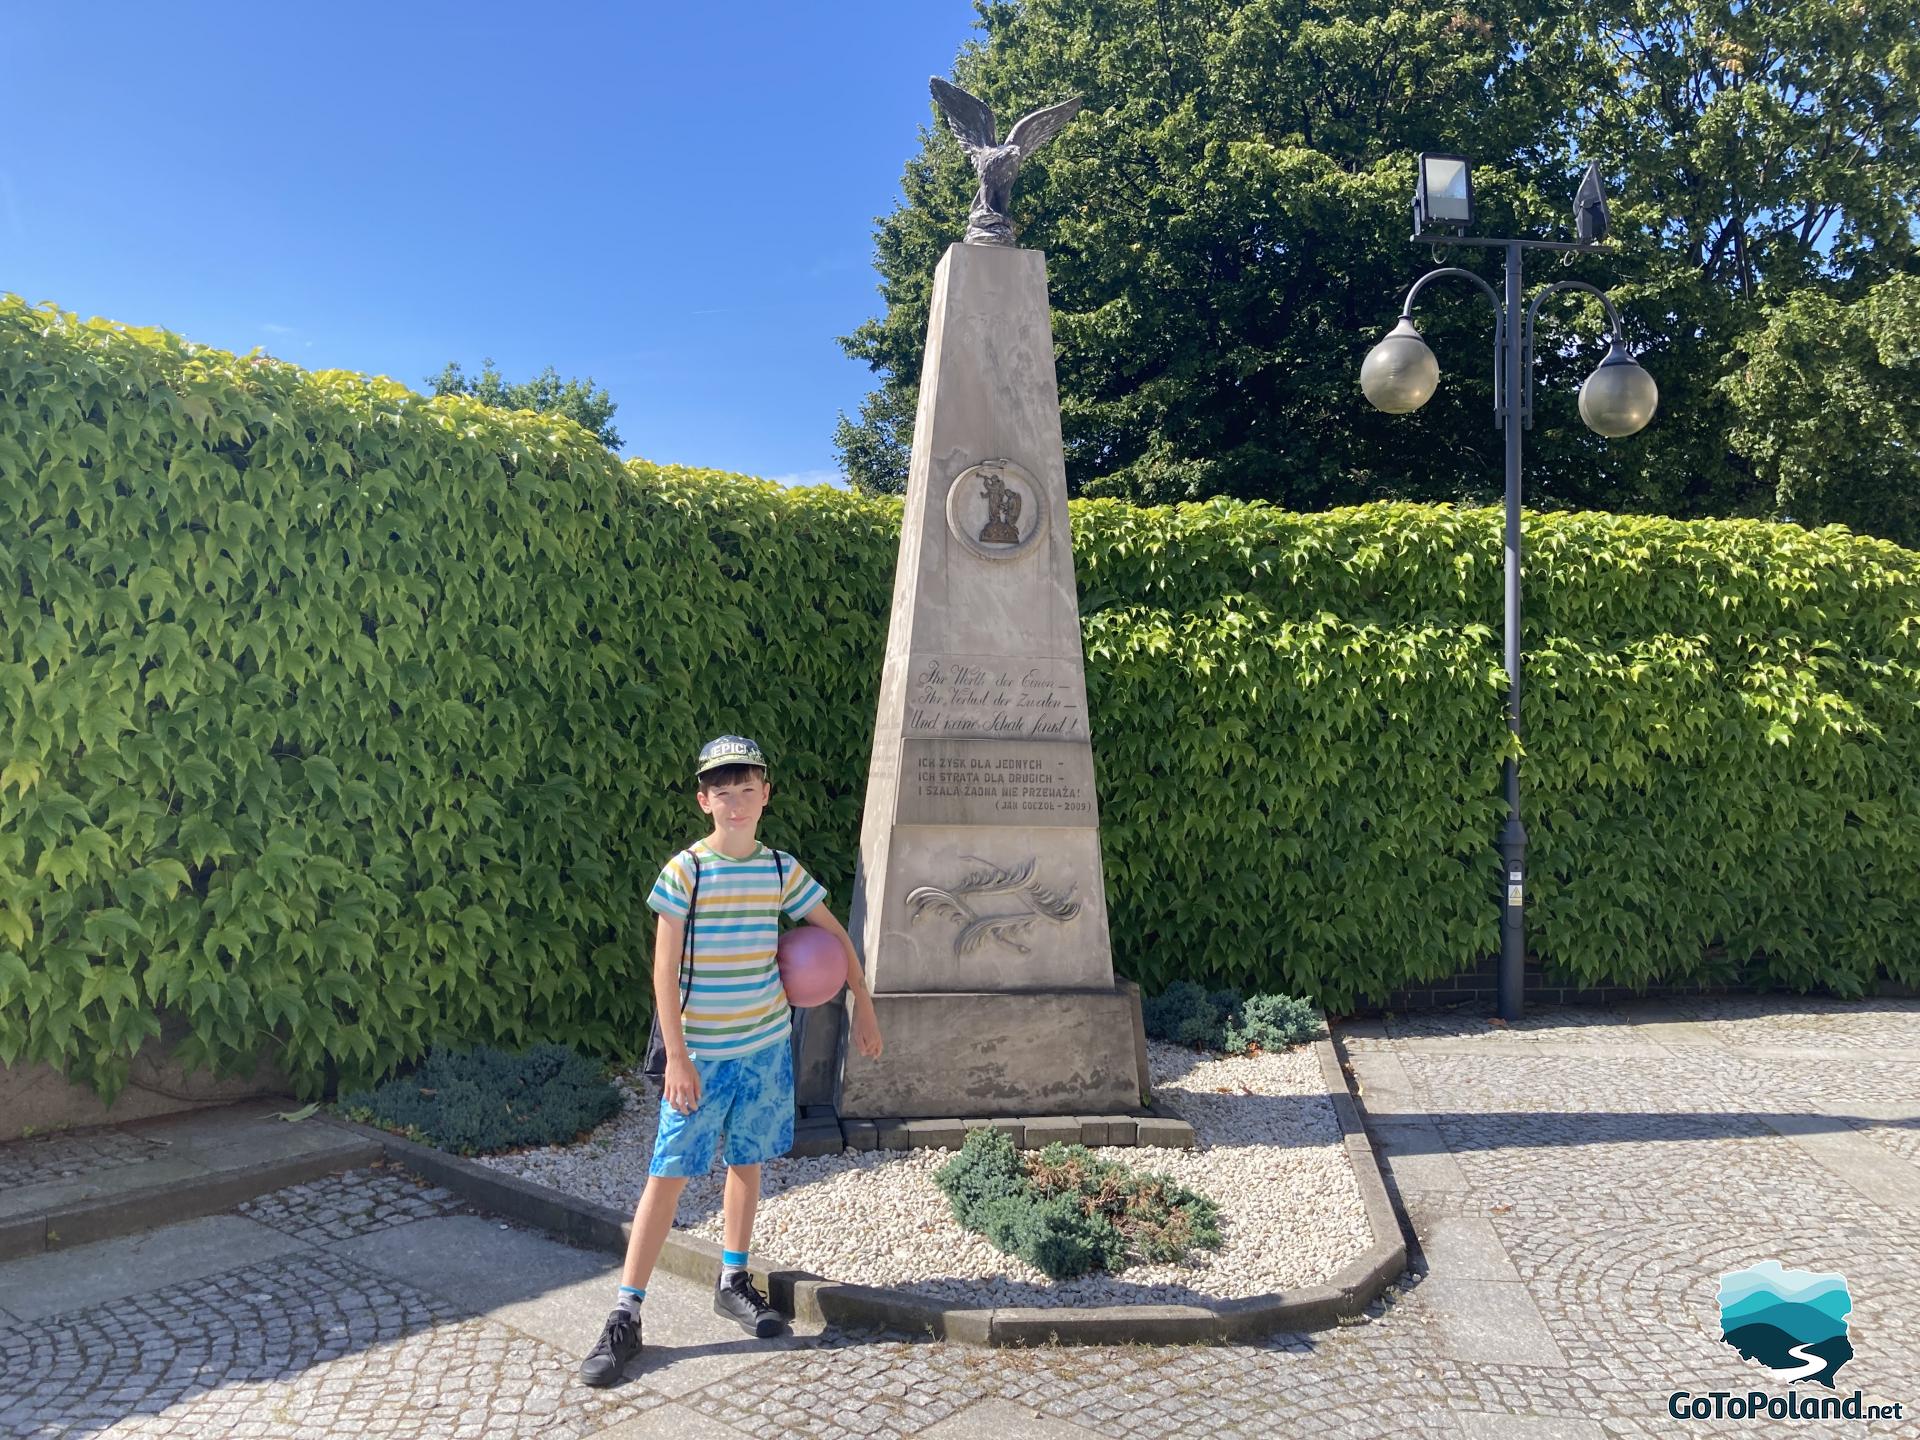 a boy standing next to a monument, at the top of which there is a statue of an eagle